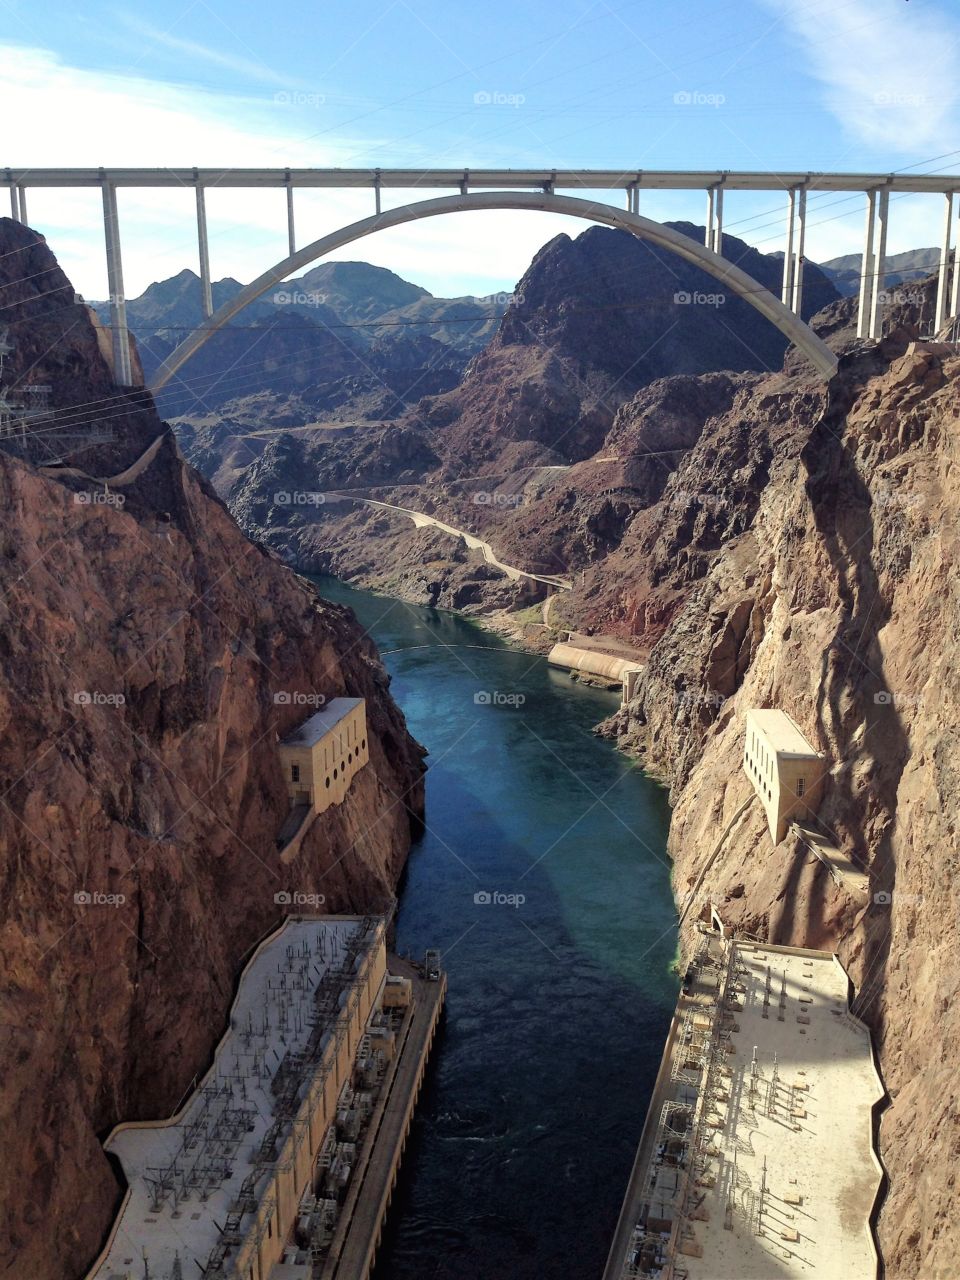 The Hoover dam